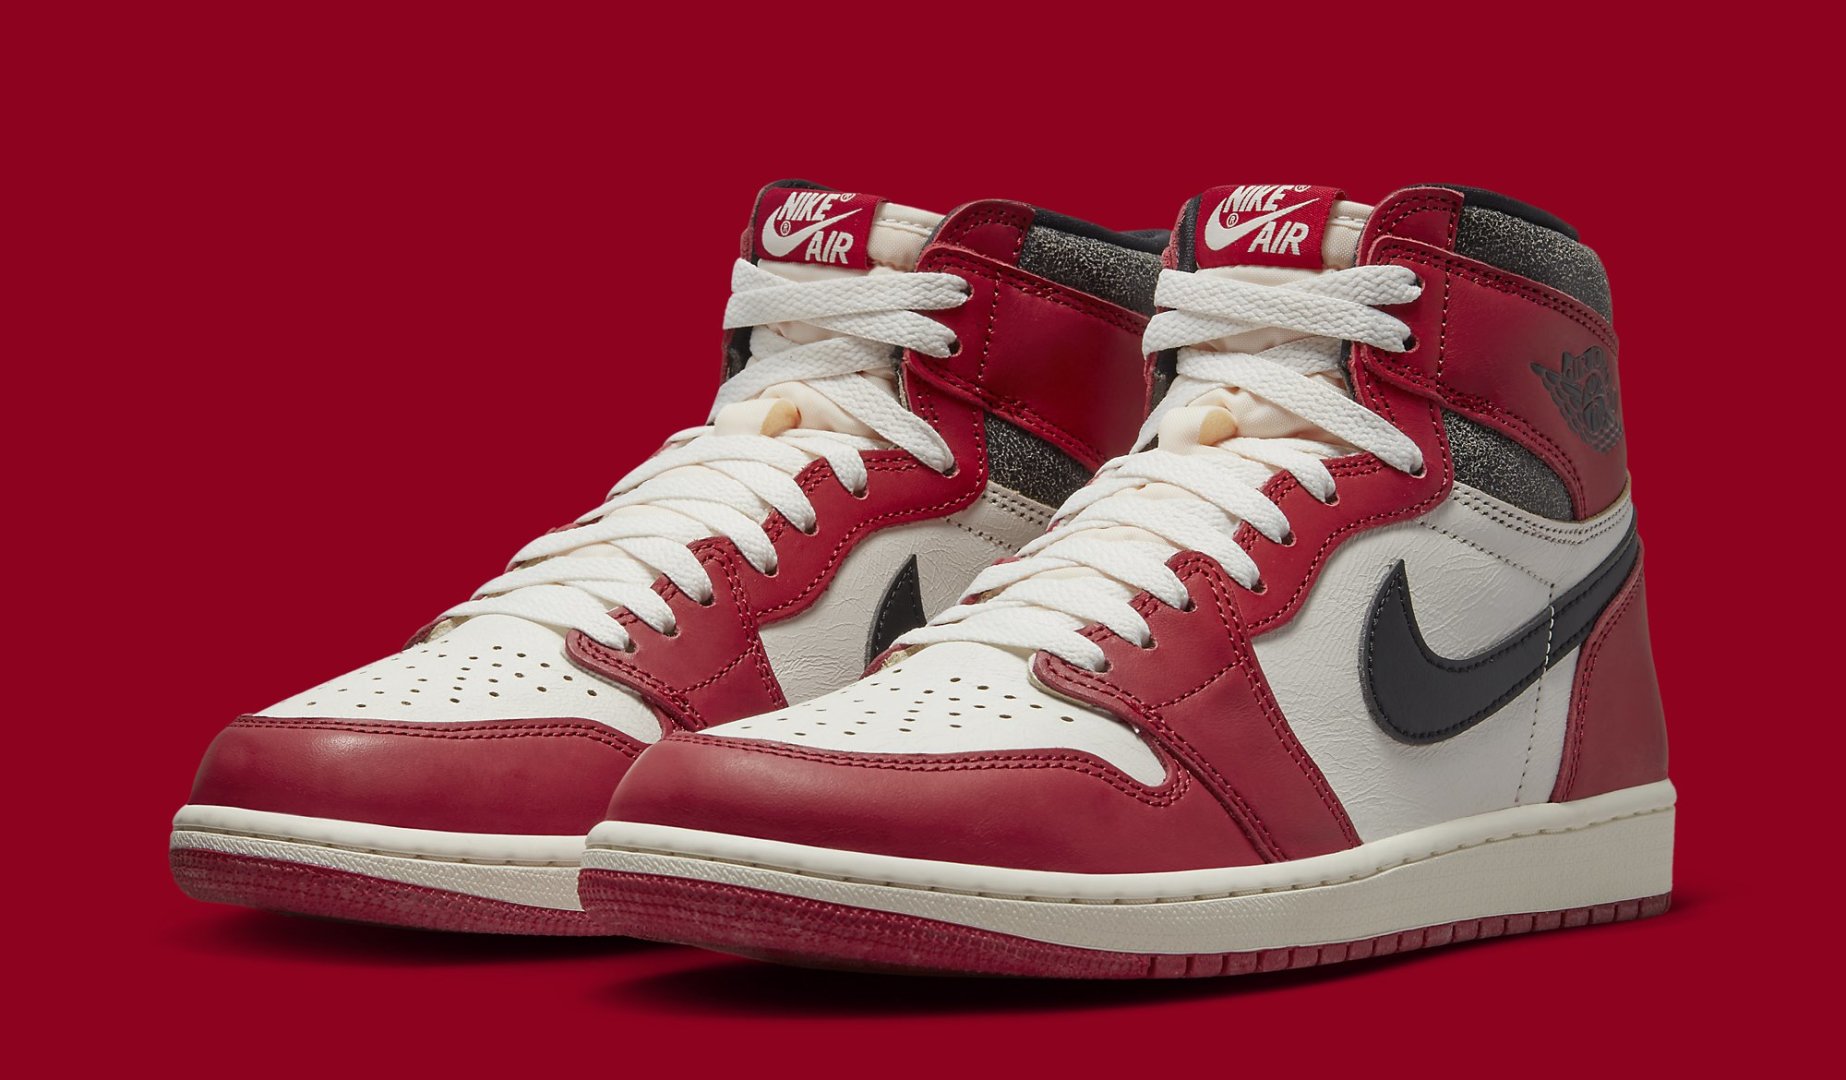 Jordan Responds to Moldy 'Lost and Found' Air Jordan 1 Issue